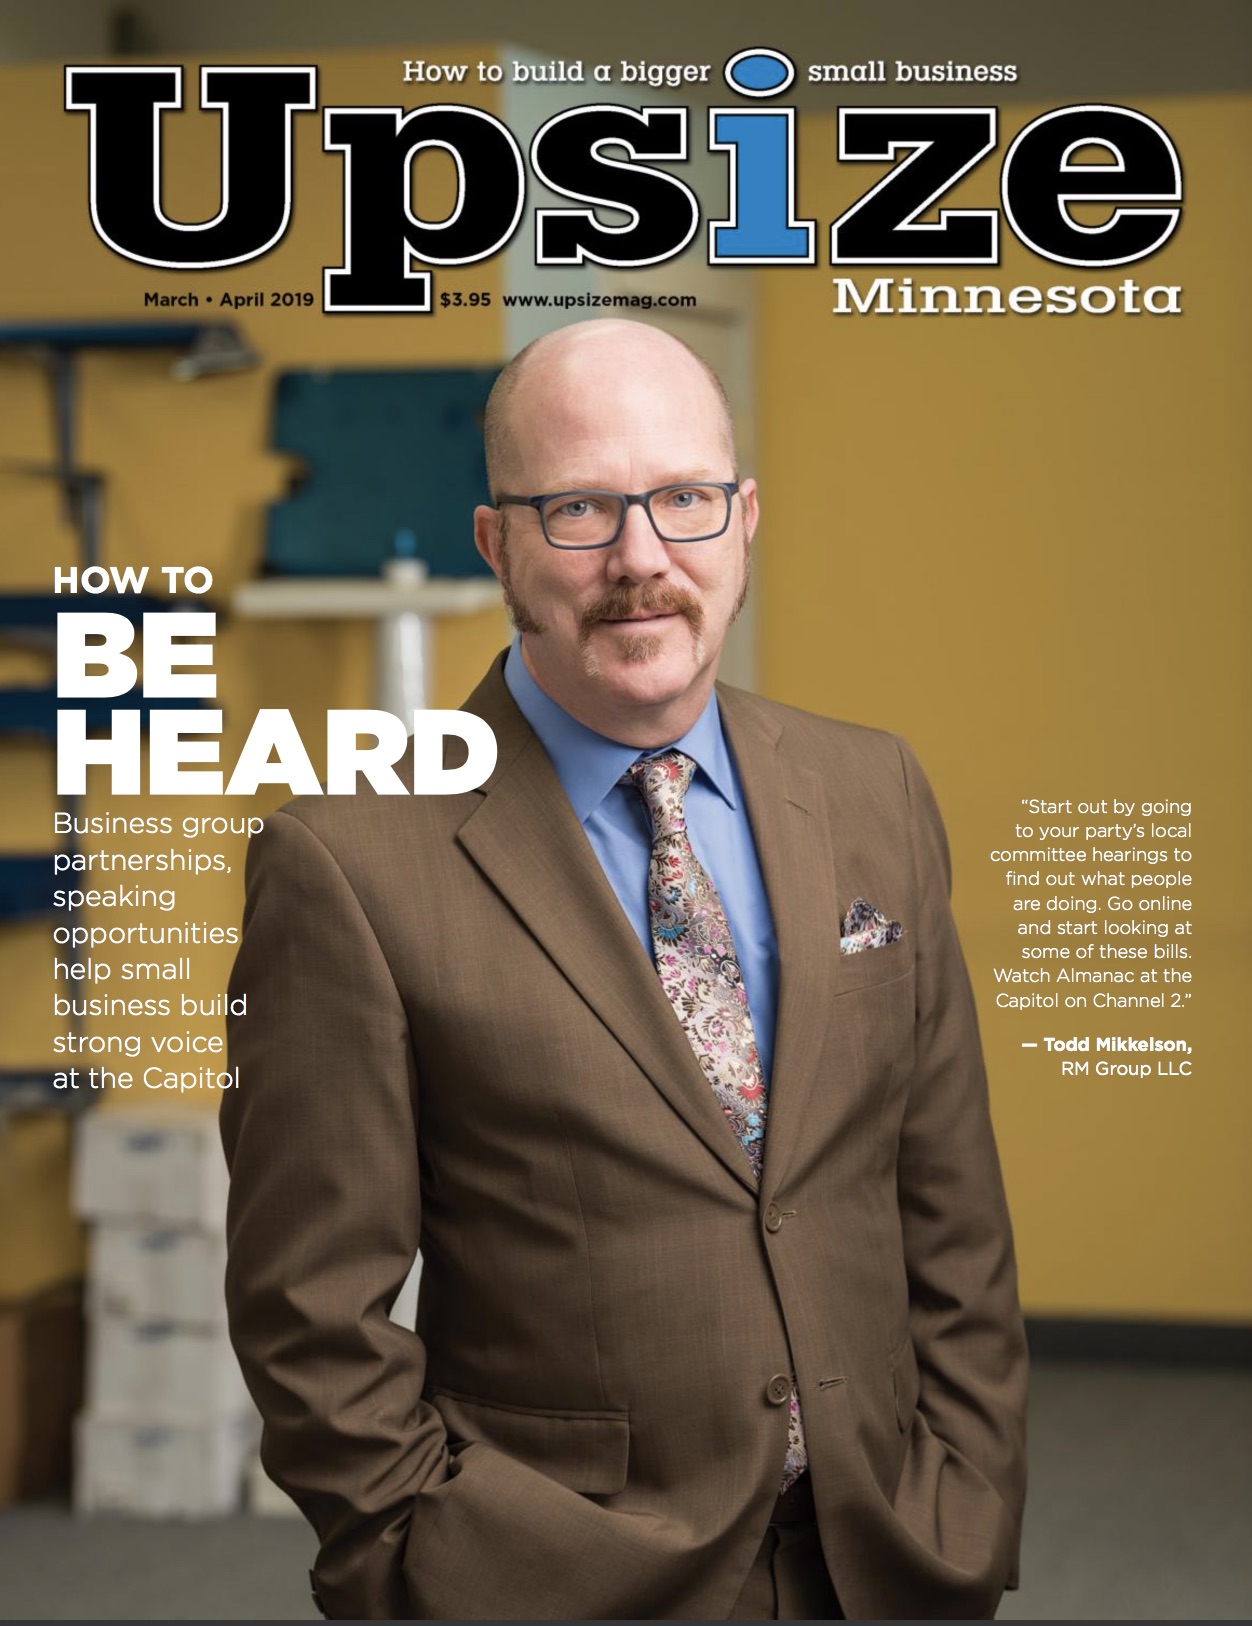 Owner Todd Mikkelson featured in Upsize Magazine